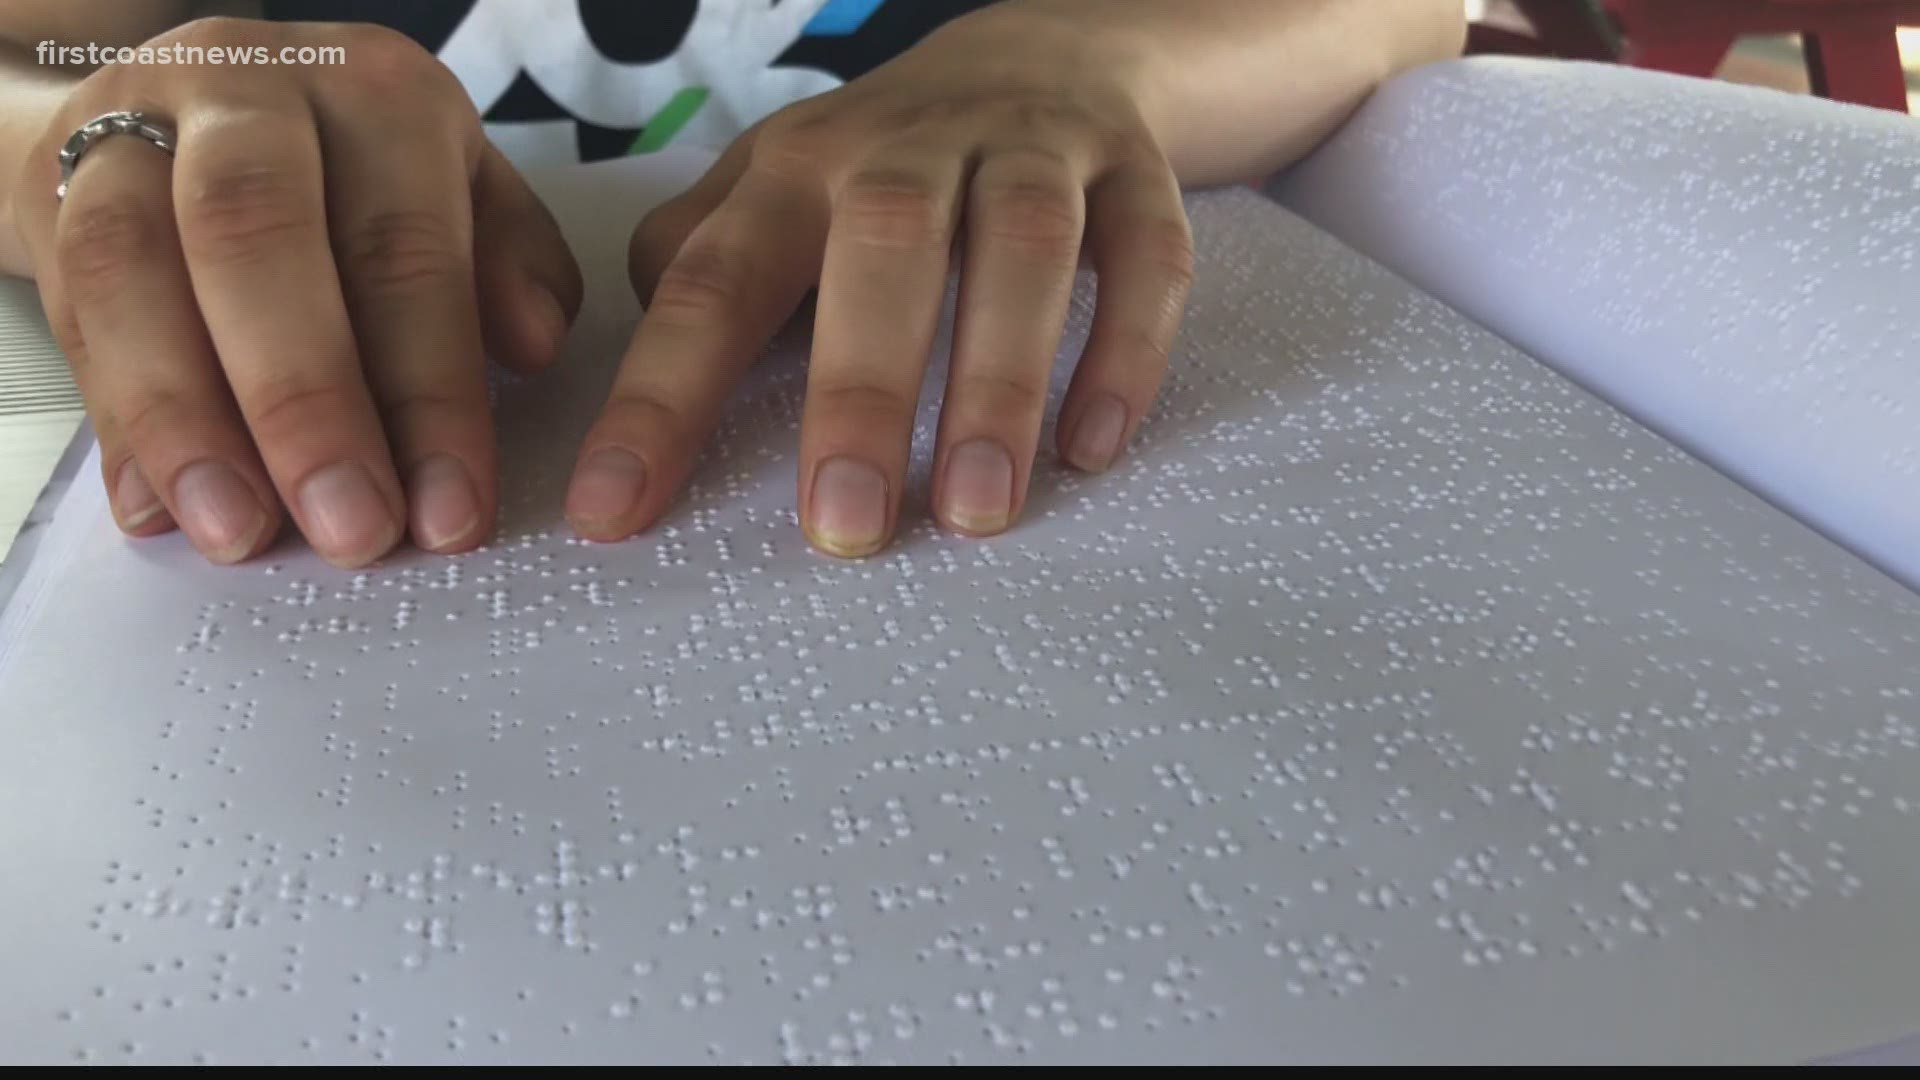 Two visually impaired teens at the Florida School for the Deaf and Blind are in the top 50 international finalists for their Braille reading and comprehension skills